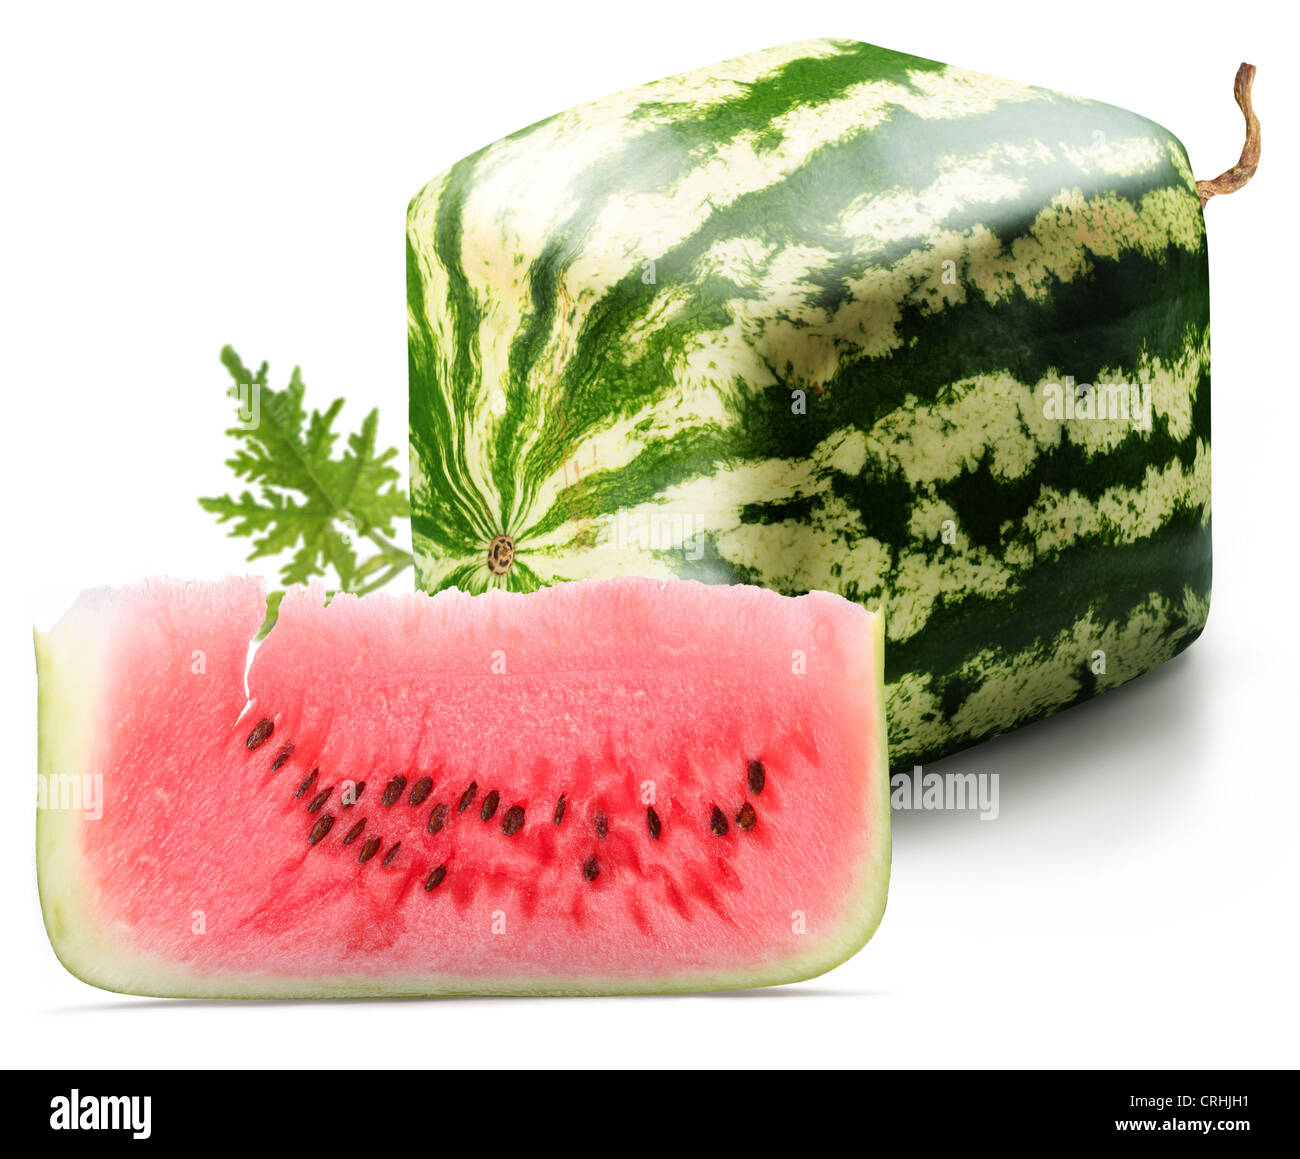 Cubic watermelon with slice on a white background. Stock Photo